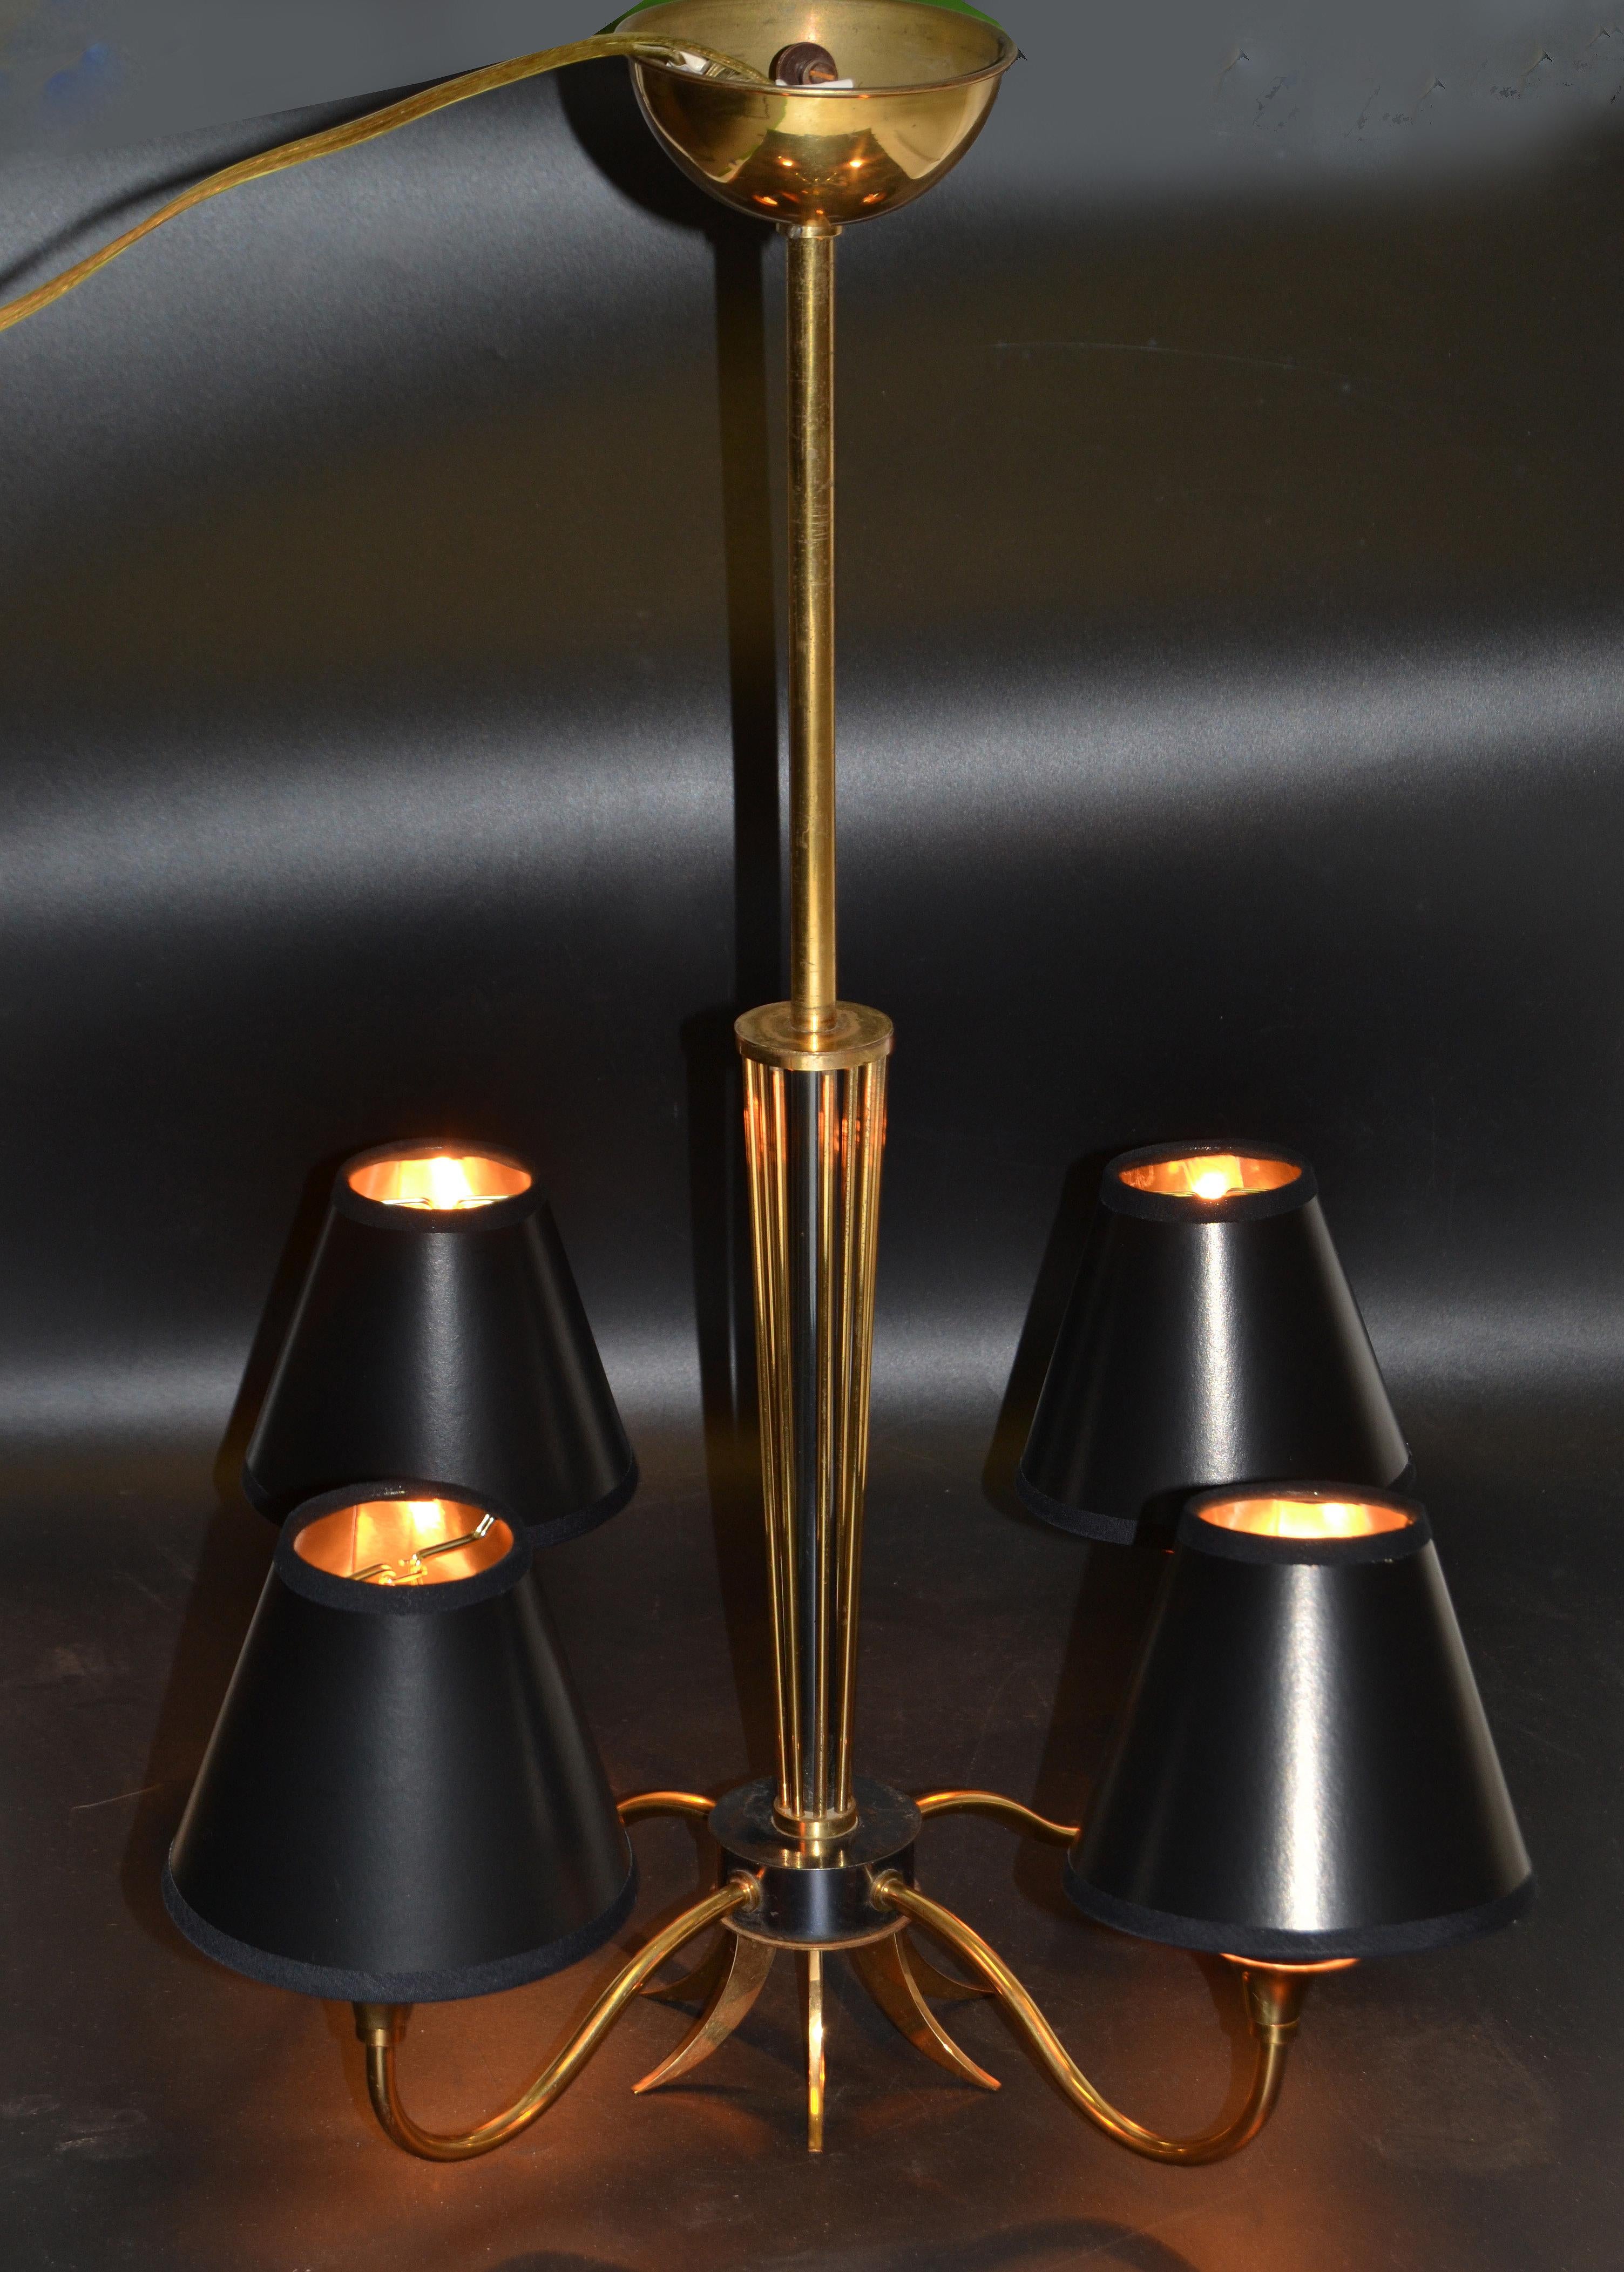 Superb two patina brass and gun metal Maison Lunel four arms chandelier.
US rewired and in working condition each arm takes a max 25 watts light bulb.
Comes with black & gold paper shades.